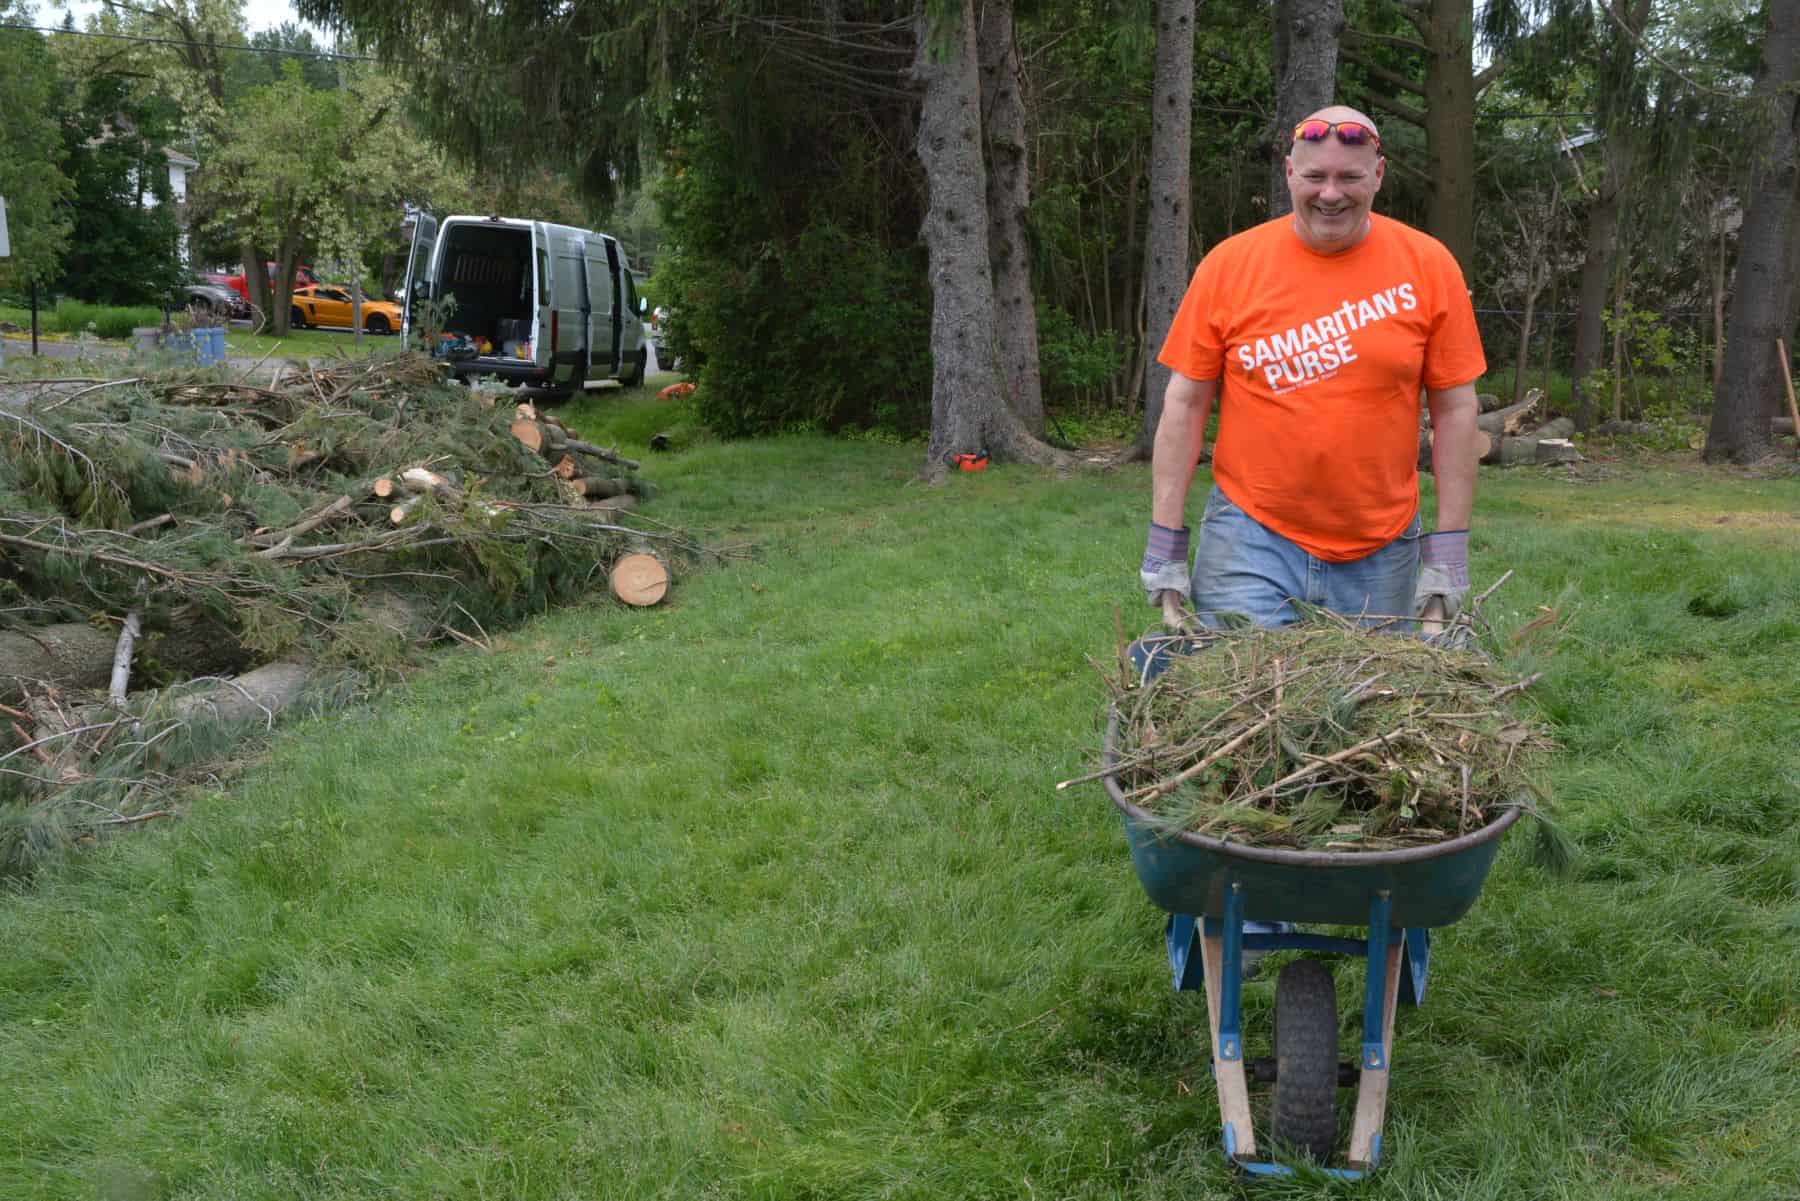 Volunteer teams in Ottawa are helping to remove fallen trees, clean up debris from homes, and help patch damaged roofs and windows as needed.